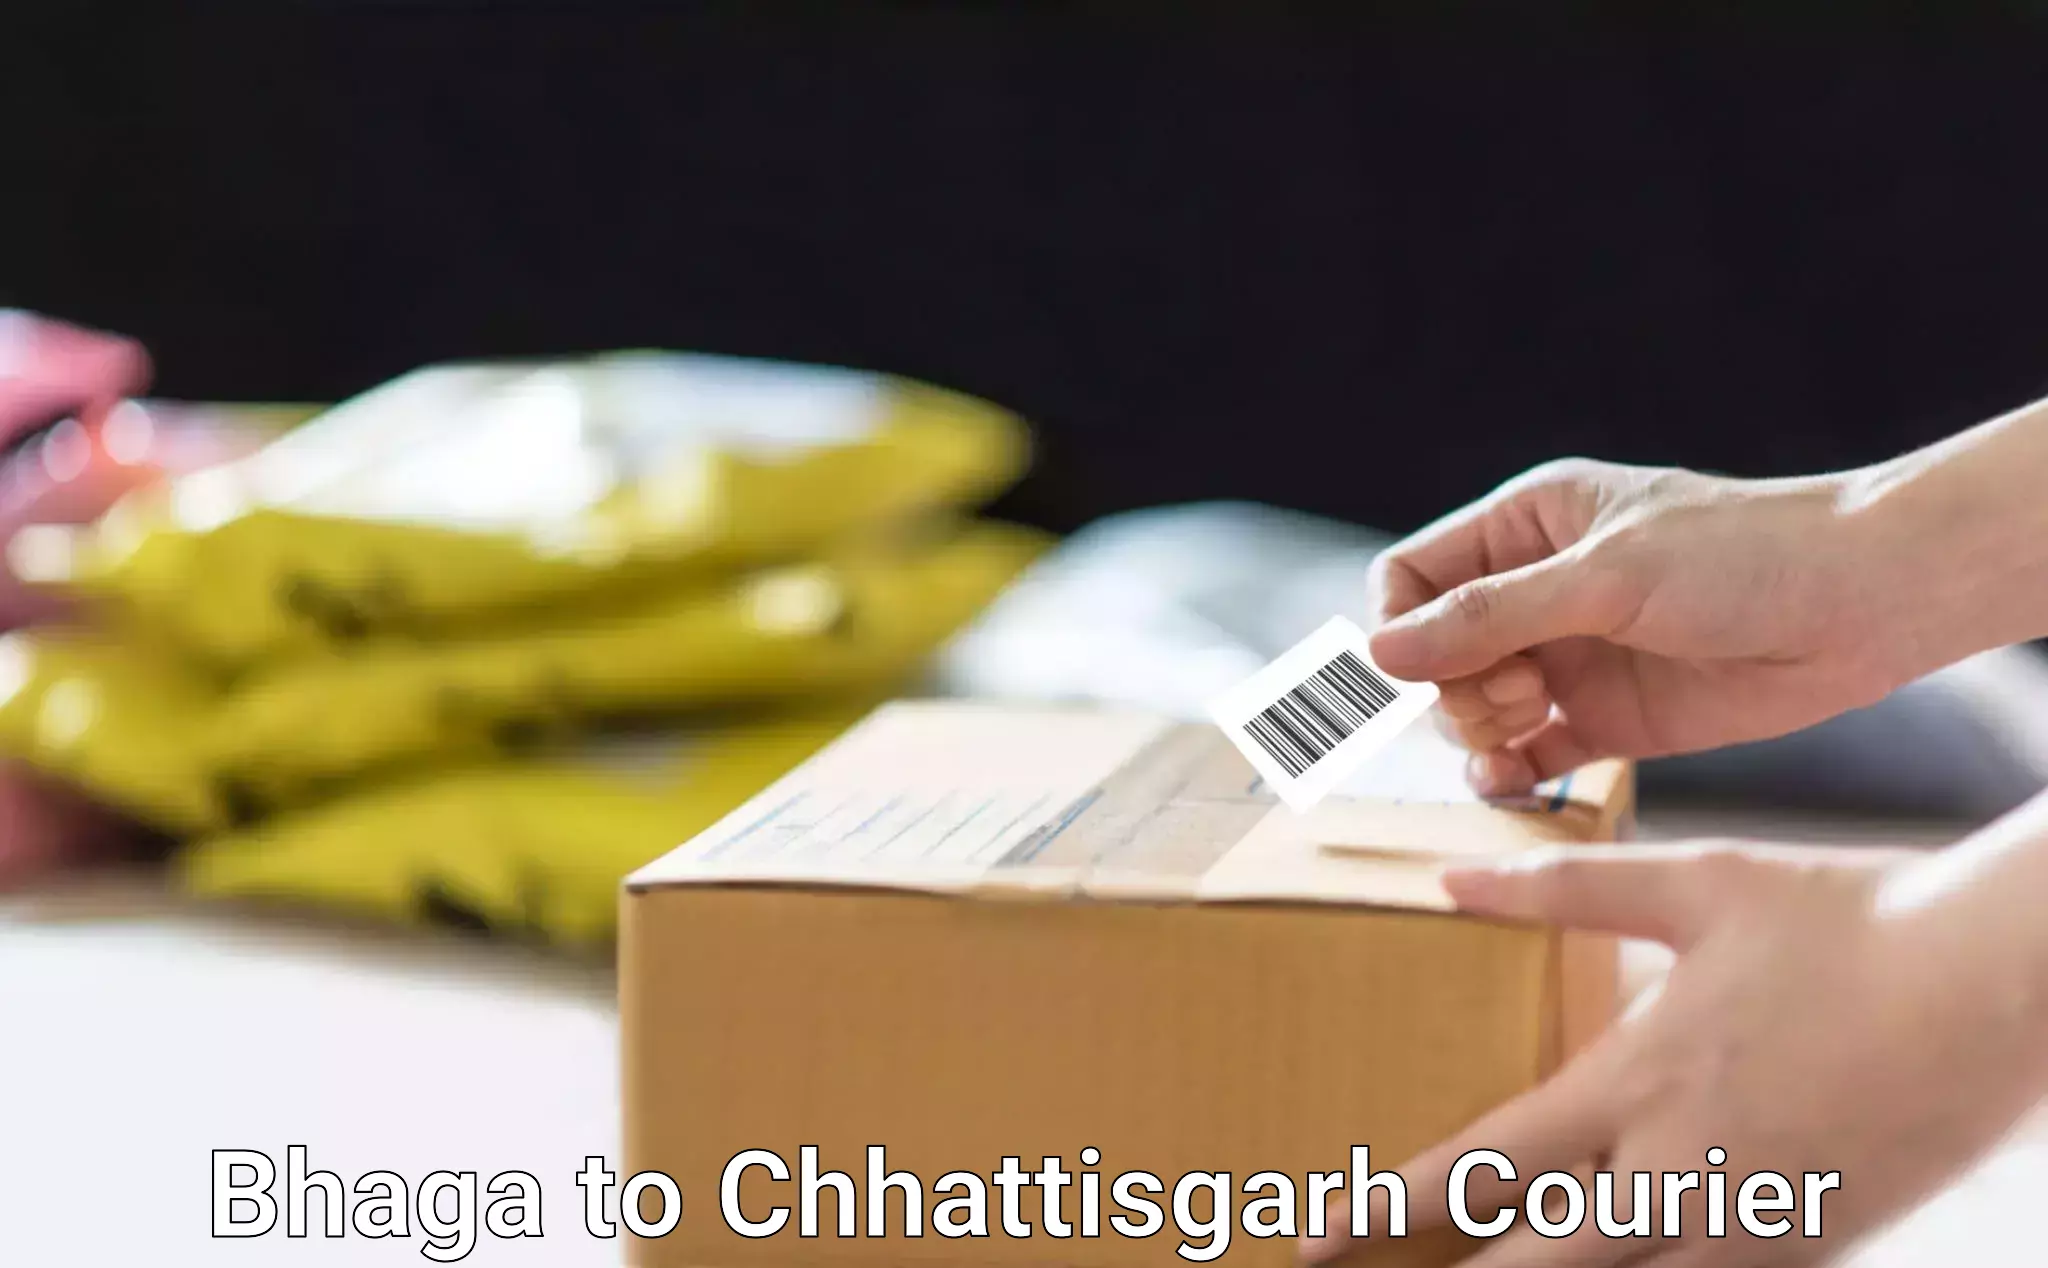 Courier service booking Bhaga to Raipur